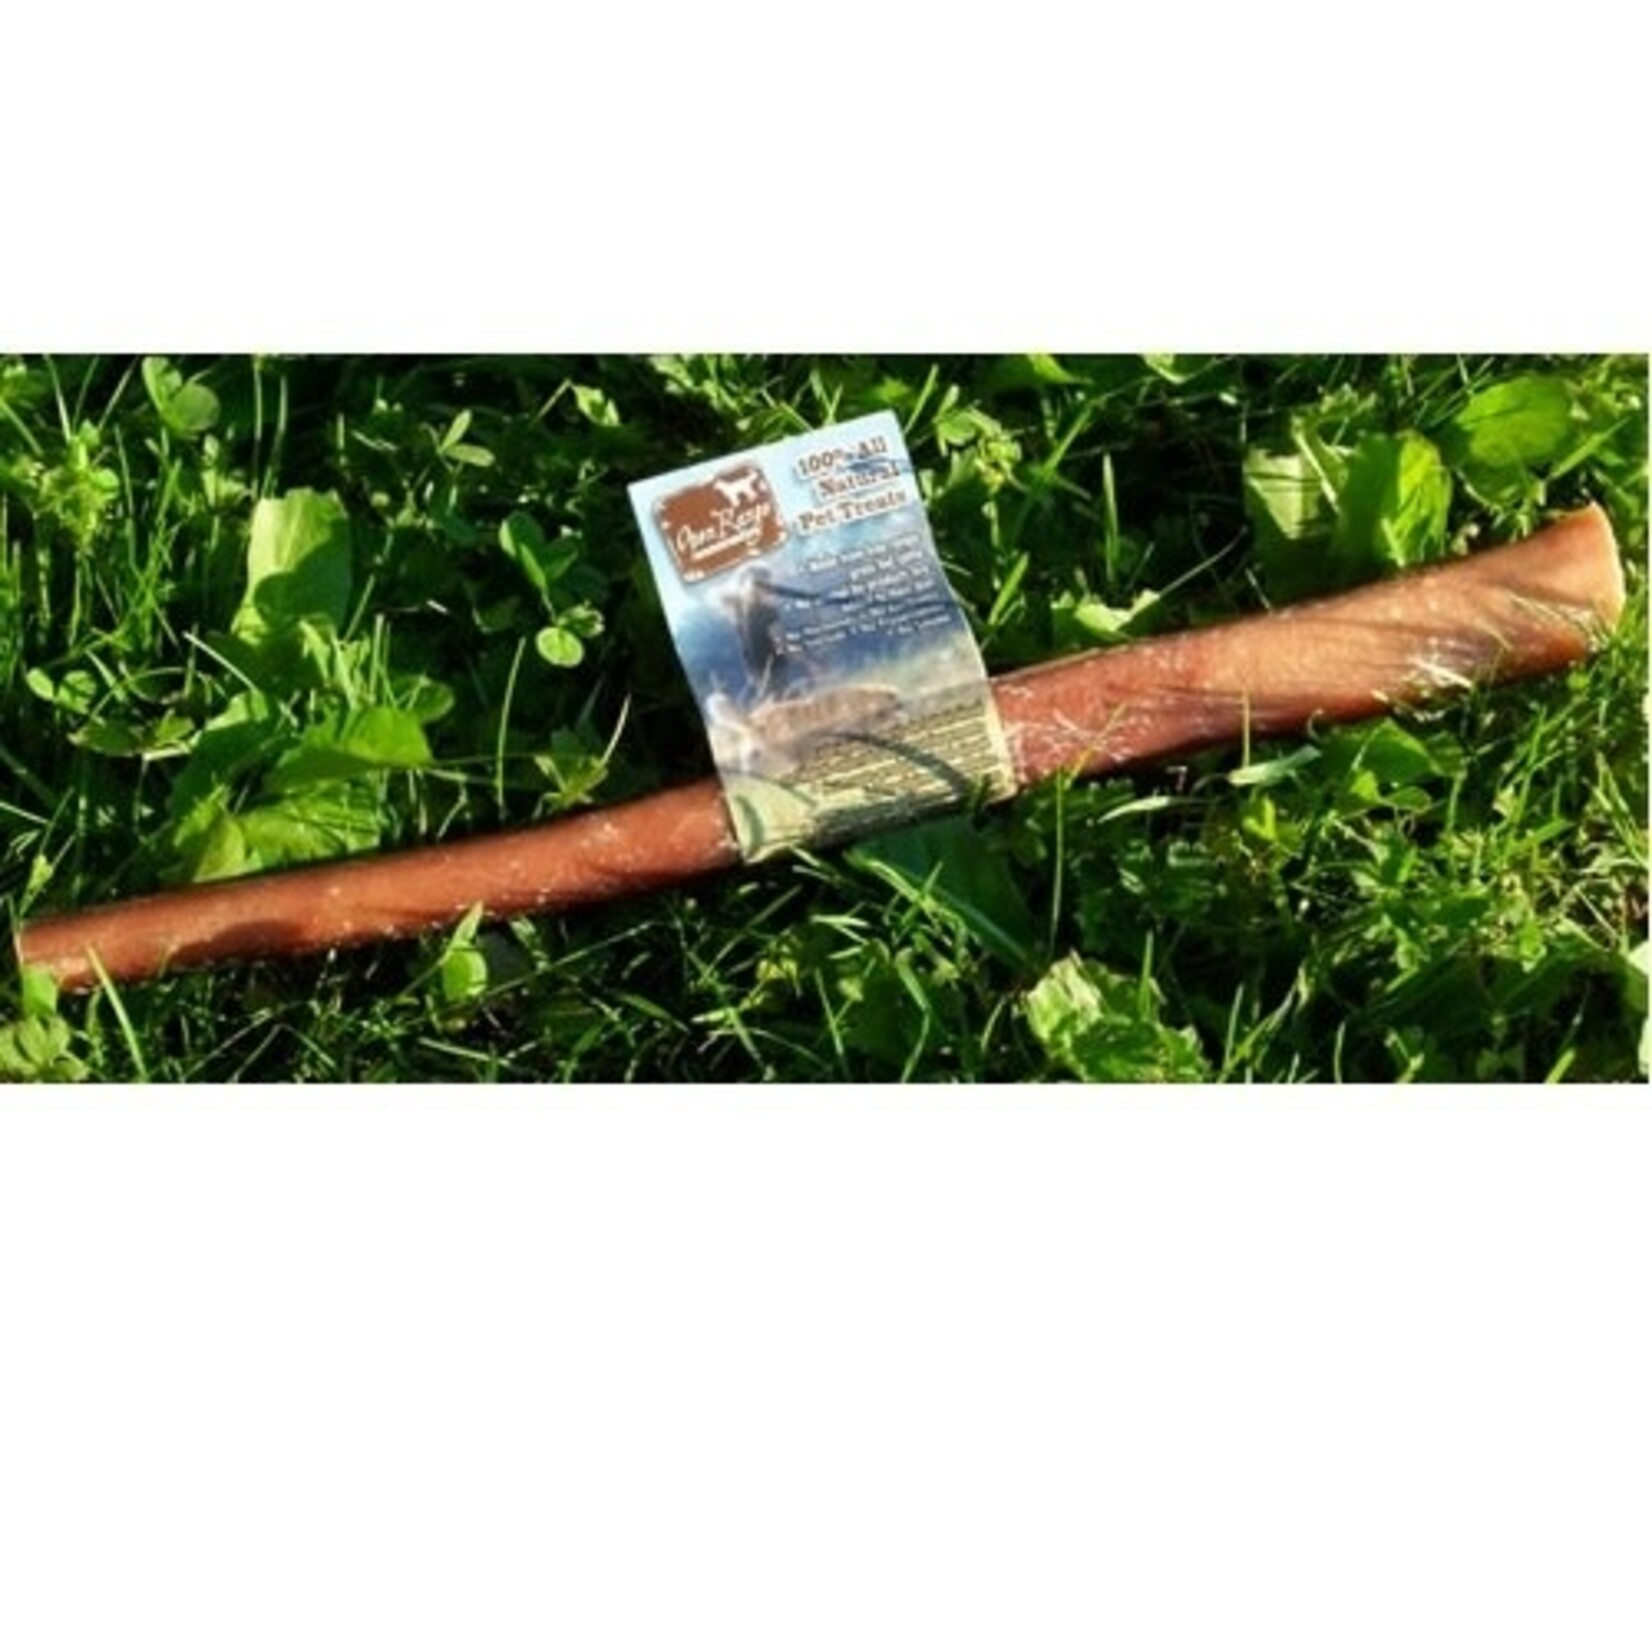 Open Range OR Odour Controlled Bull stick 22-24"